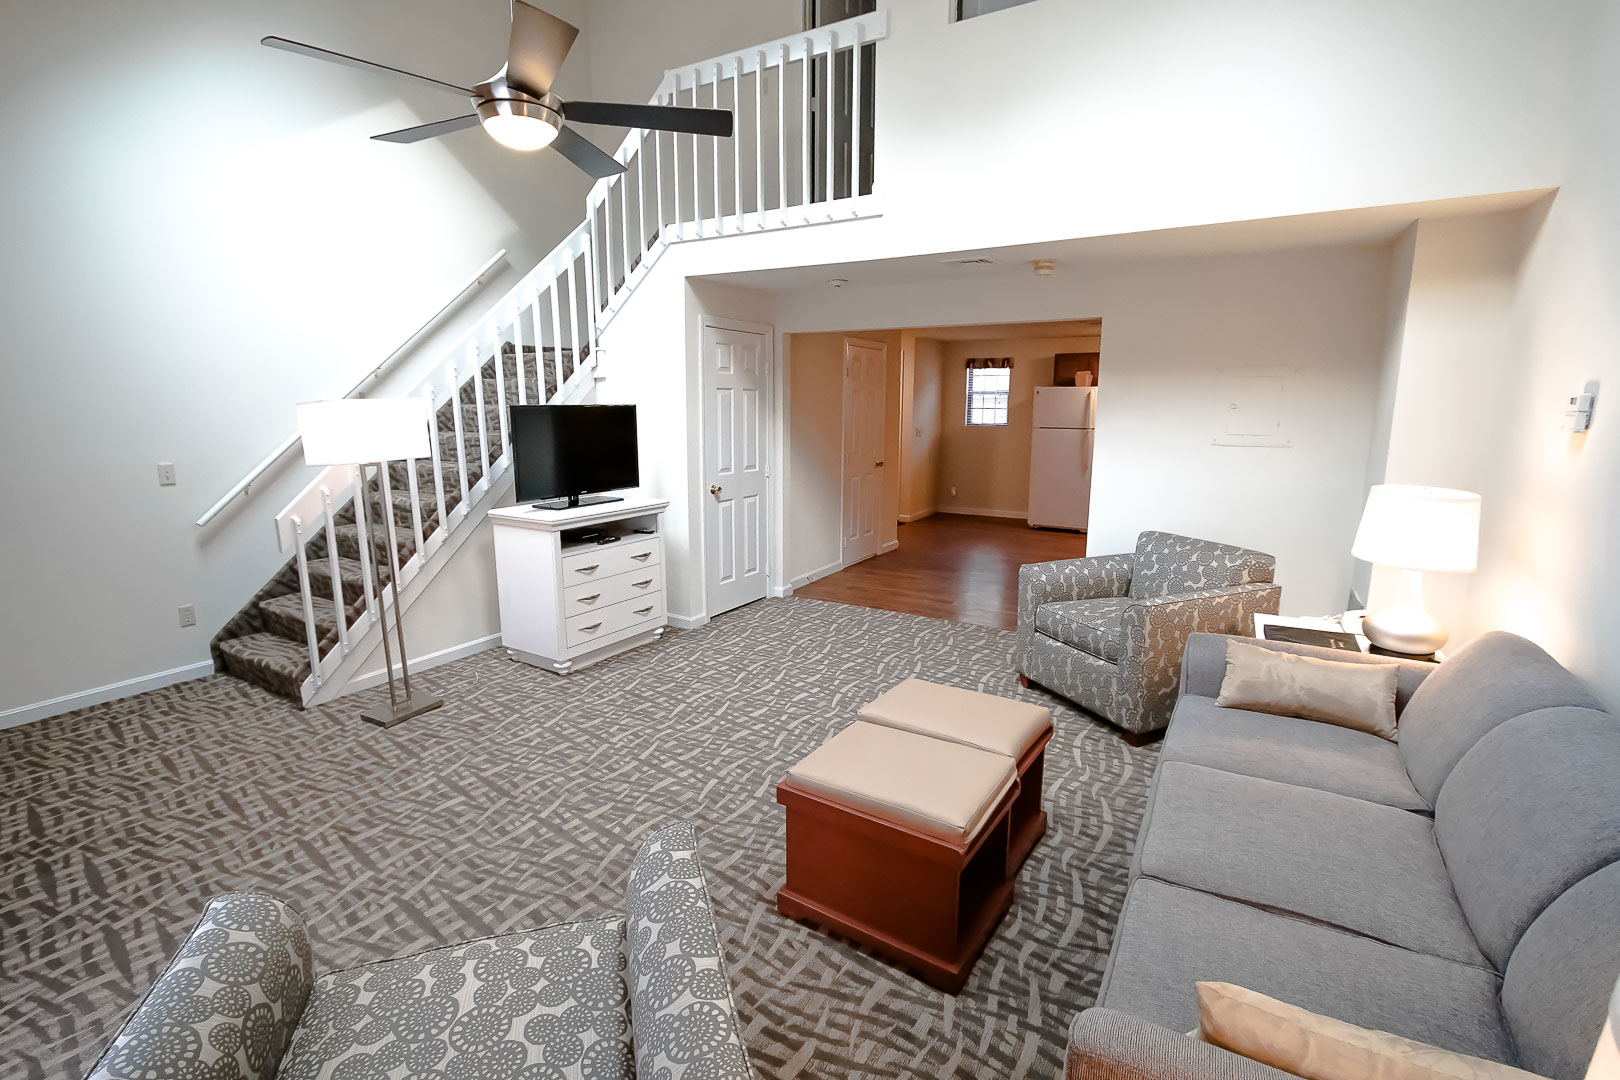 A spacious two-story condominiums at VRI's Sea Mist Resort in Massachusetts.